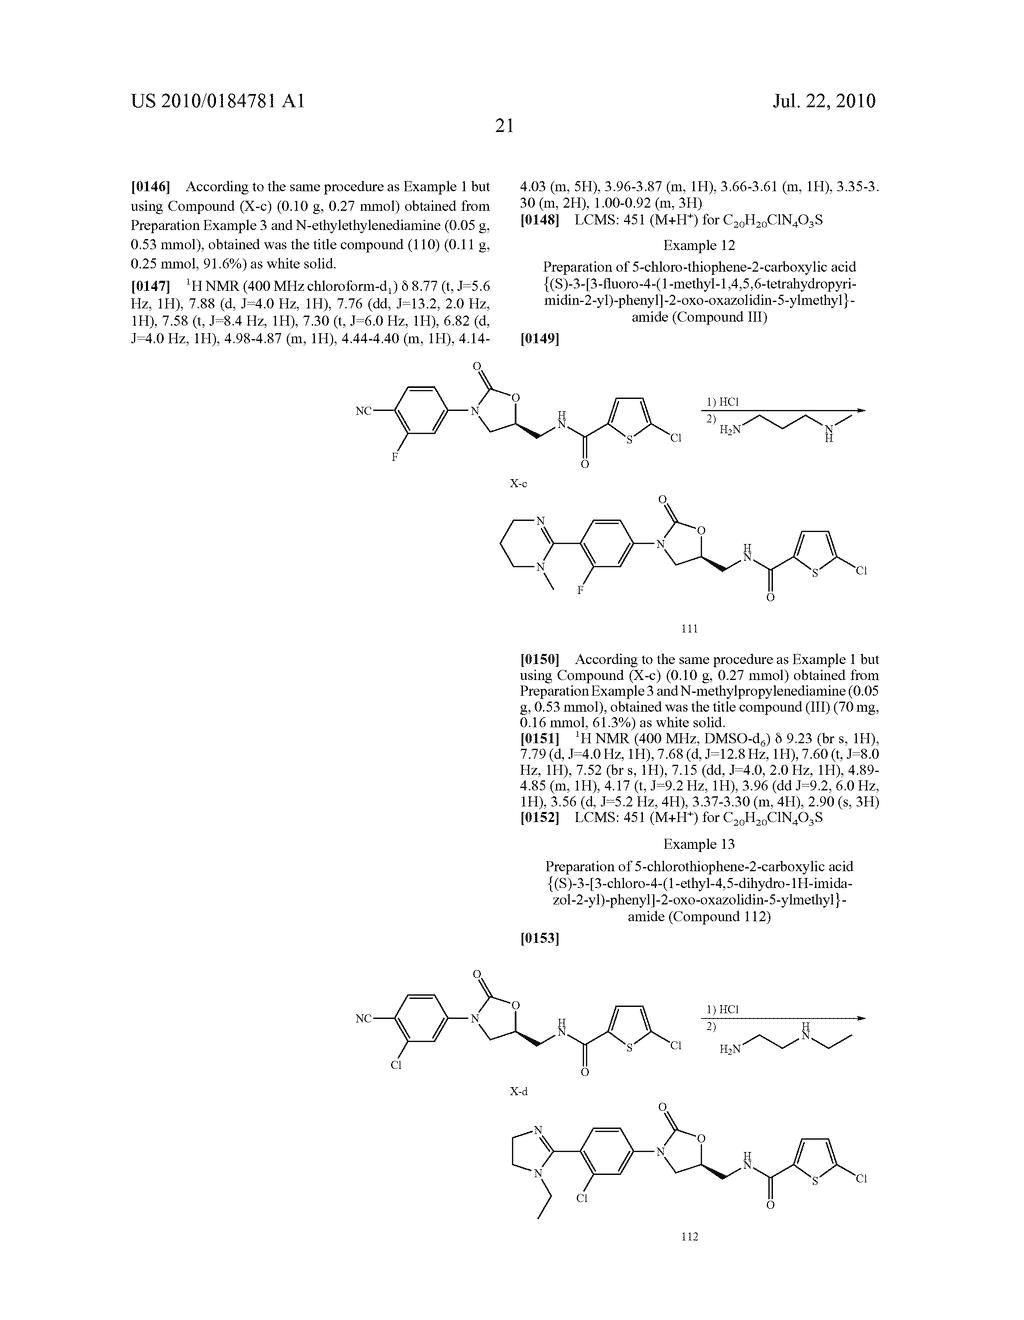 FXA INHIBITORS WITH CYCLIC AMIDINES AS P4 SUBUNIT, PROCESSES FOR THEIR PREPARATIONS, AND PHARMACEUTICAL COMPOSITIONS AND DERIVATIVES THEREOF - diagram, schematic, and image 23